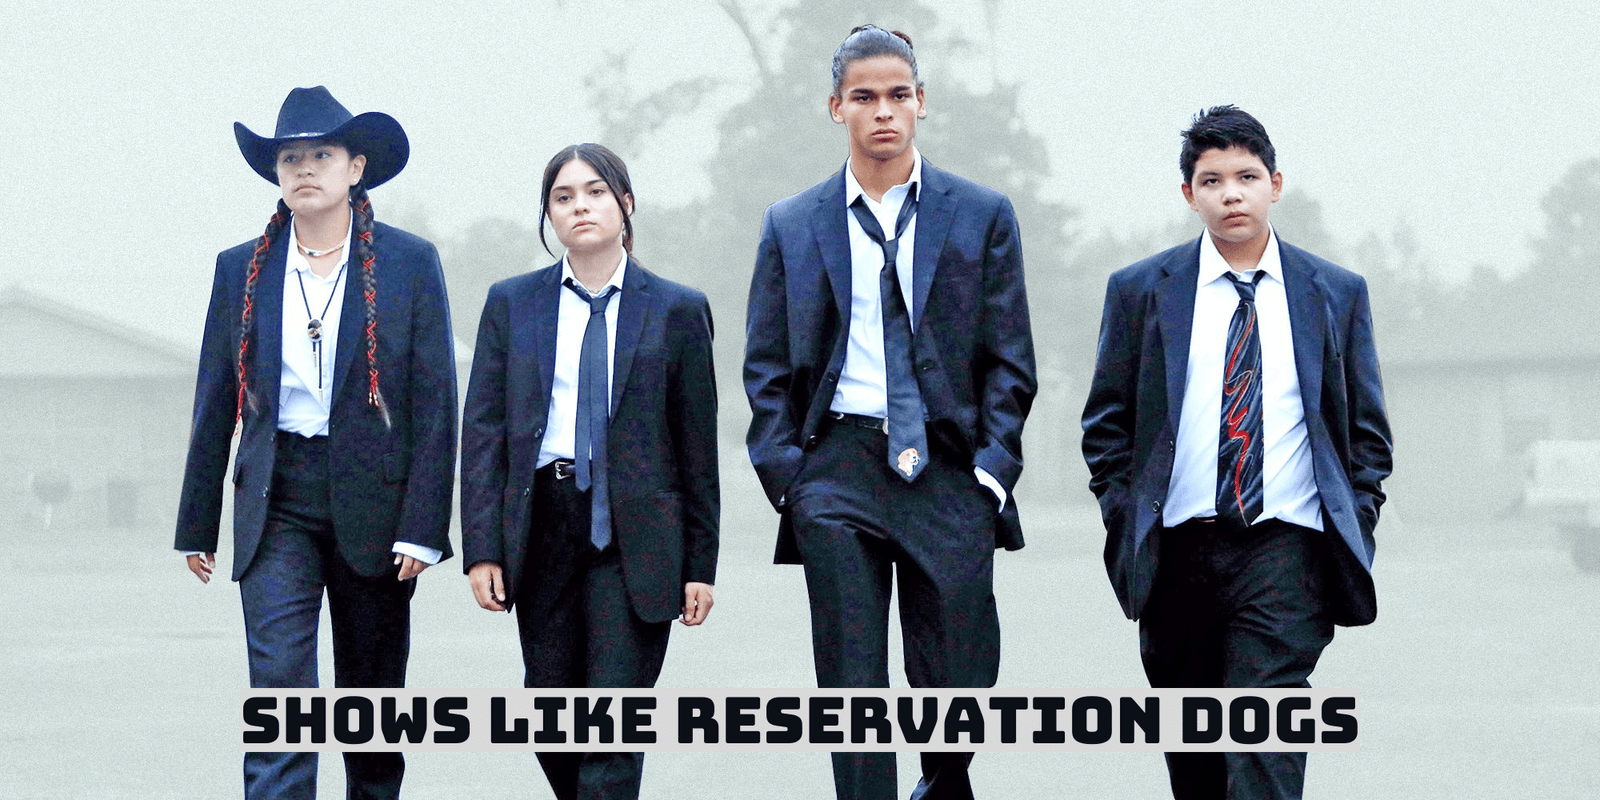 6 Shows Like Reservation Dogs